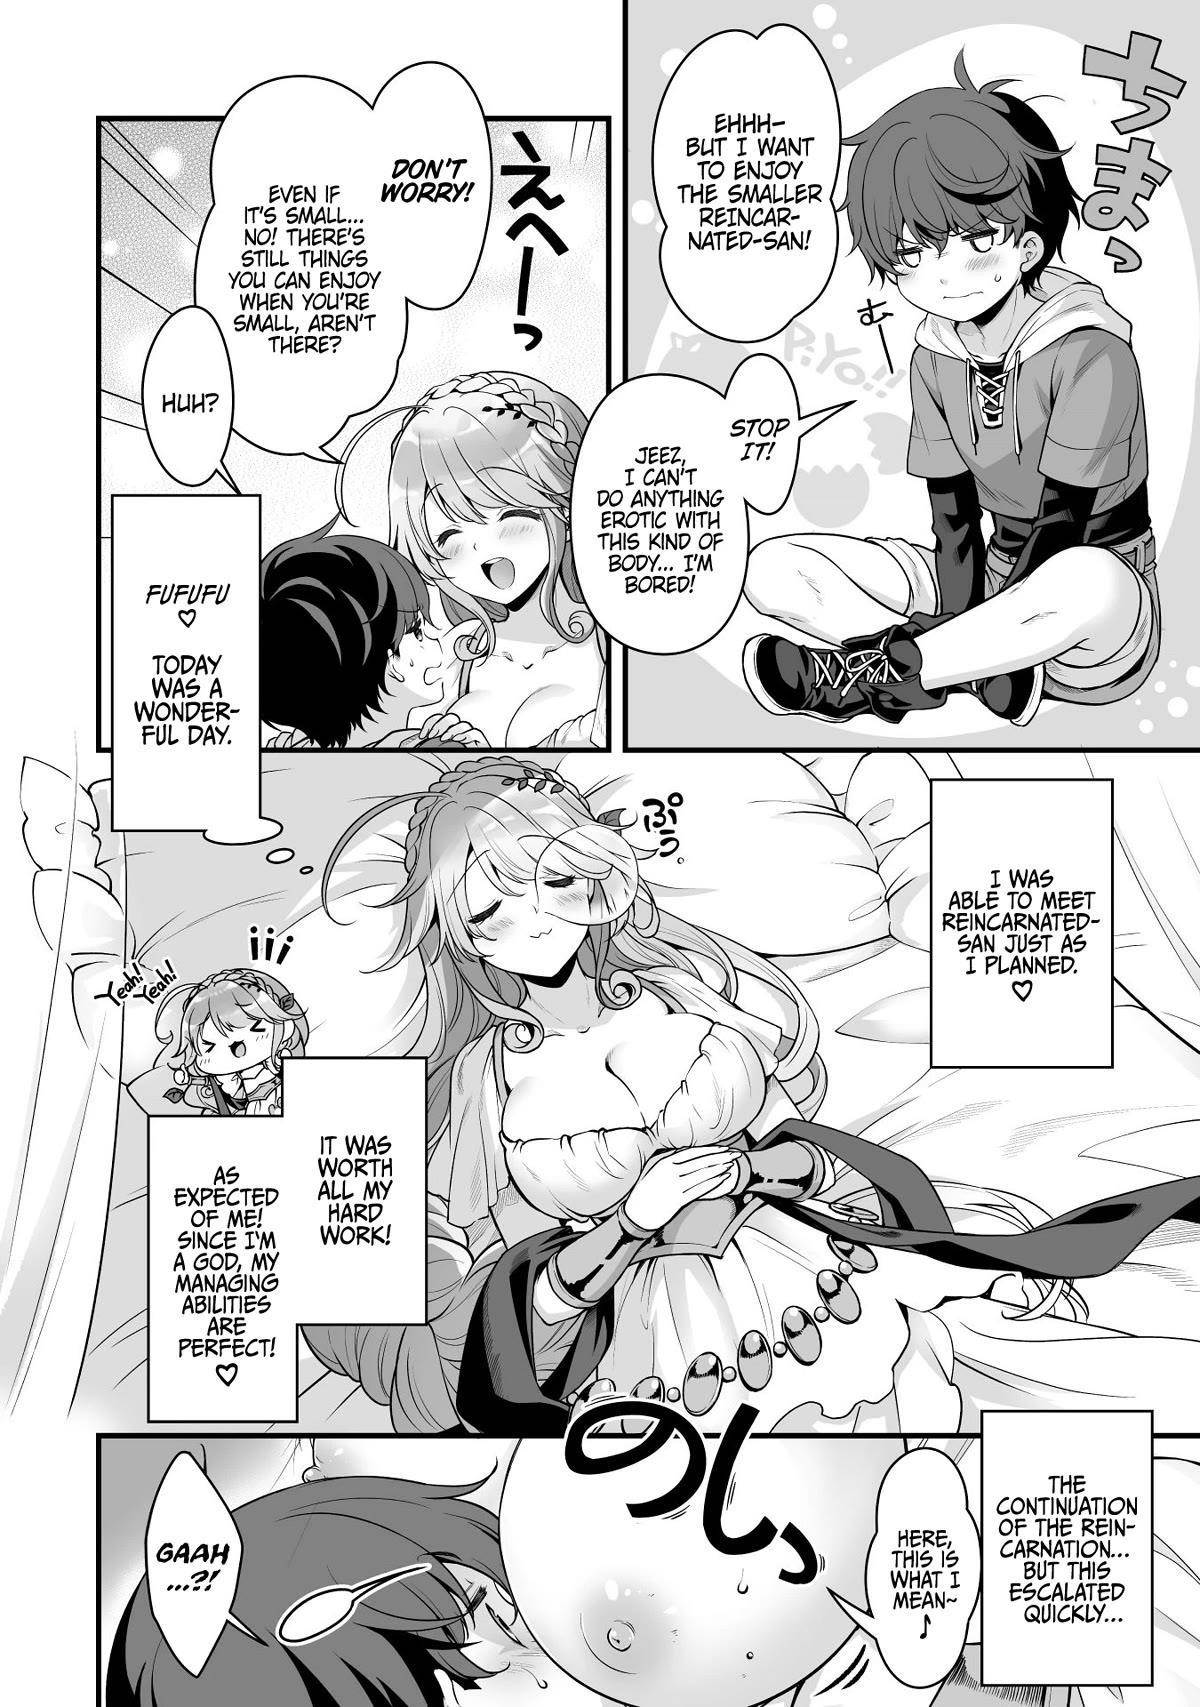 When I Was Playing Eroge With VR, I Was Reincarnated In A Different World, I Will Enslave All The Beautiful Demon Girls ~Crossout Saber~ Chapter 8.5 - Page 2